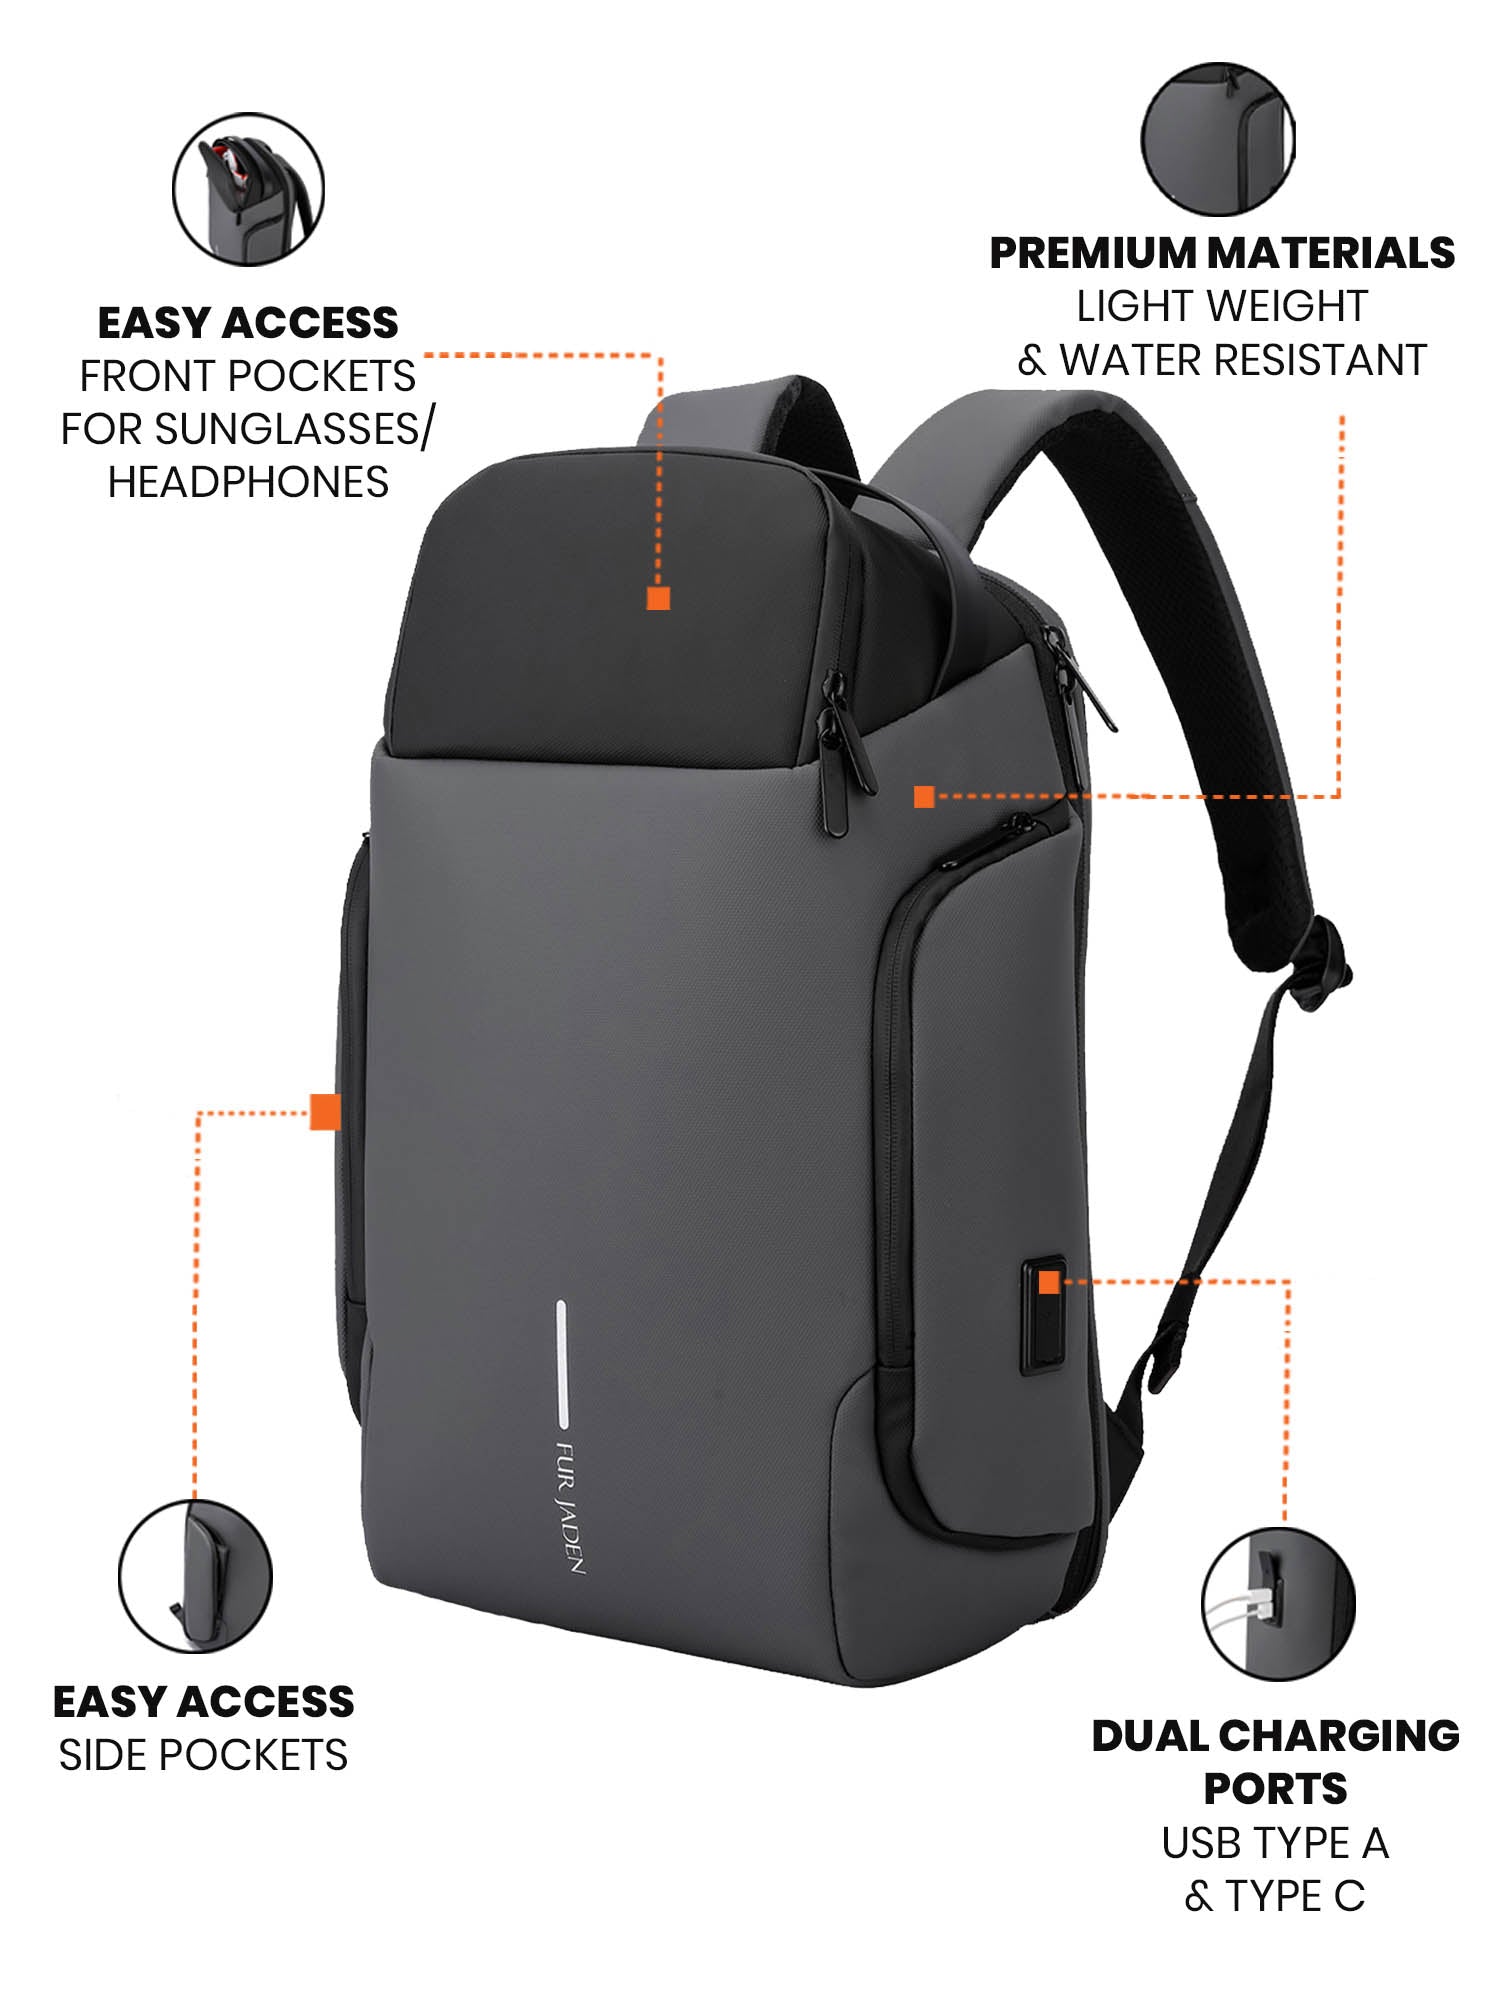 Pro-IV Laptop Backpack | Space Grey